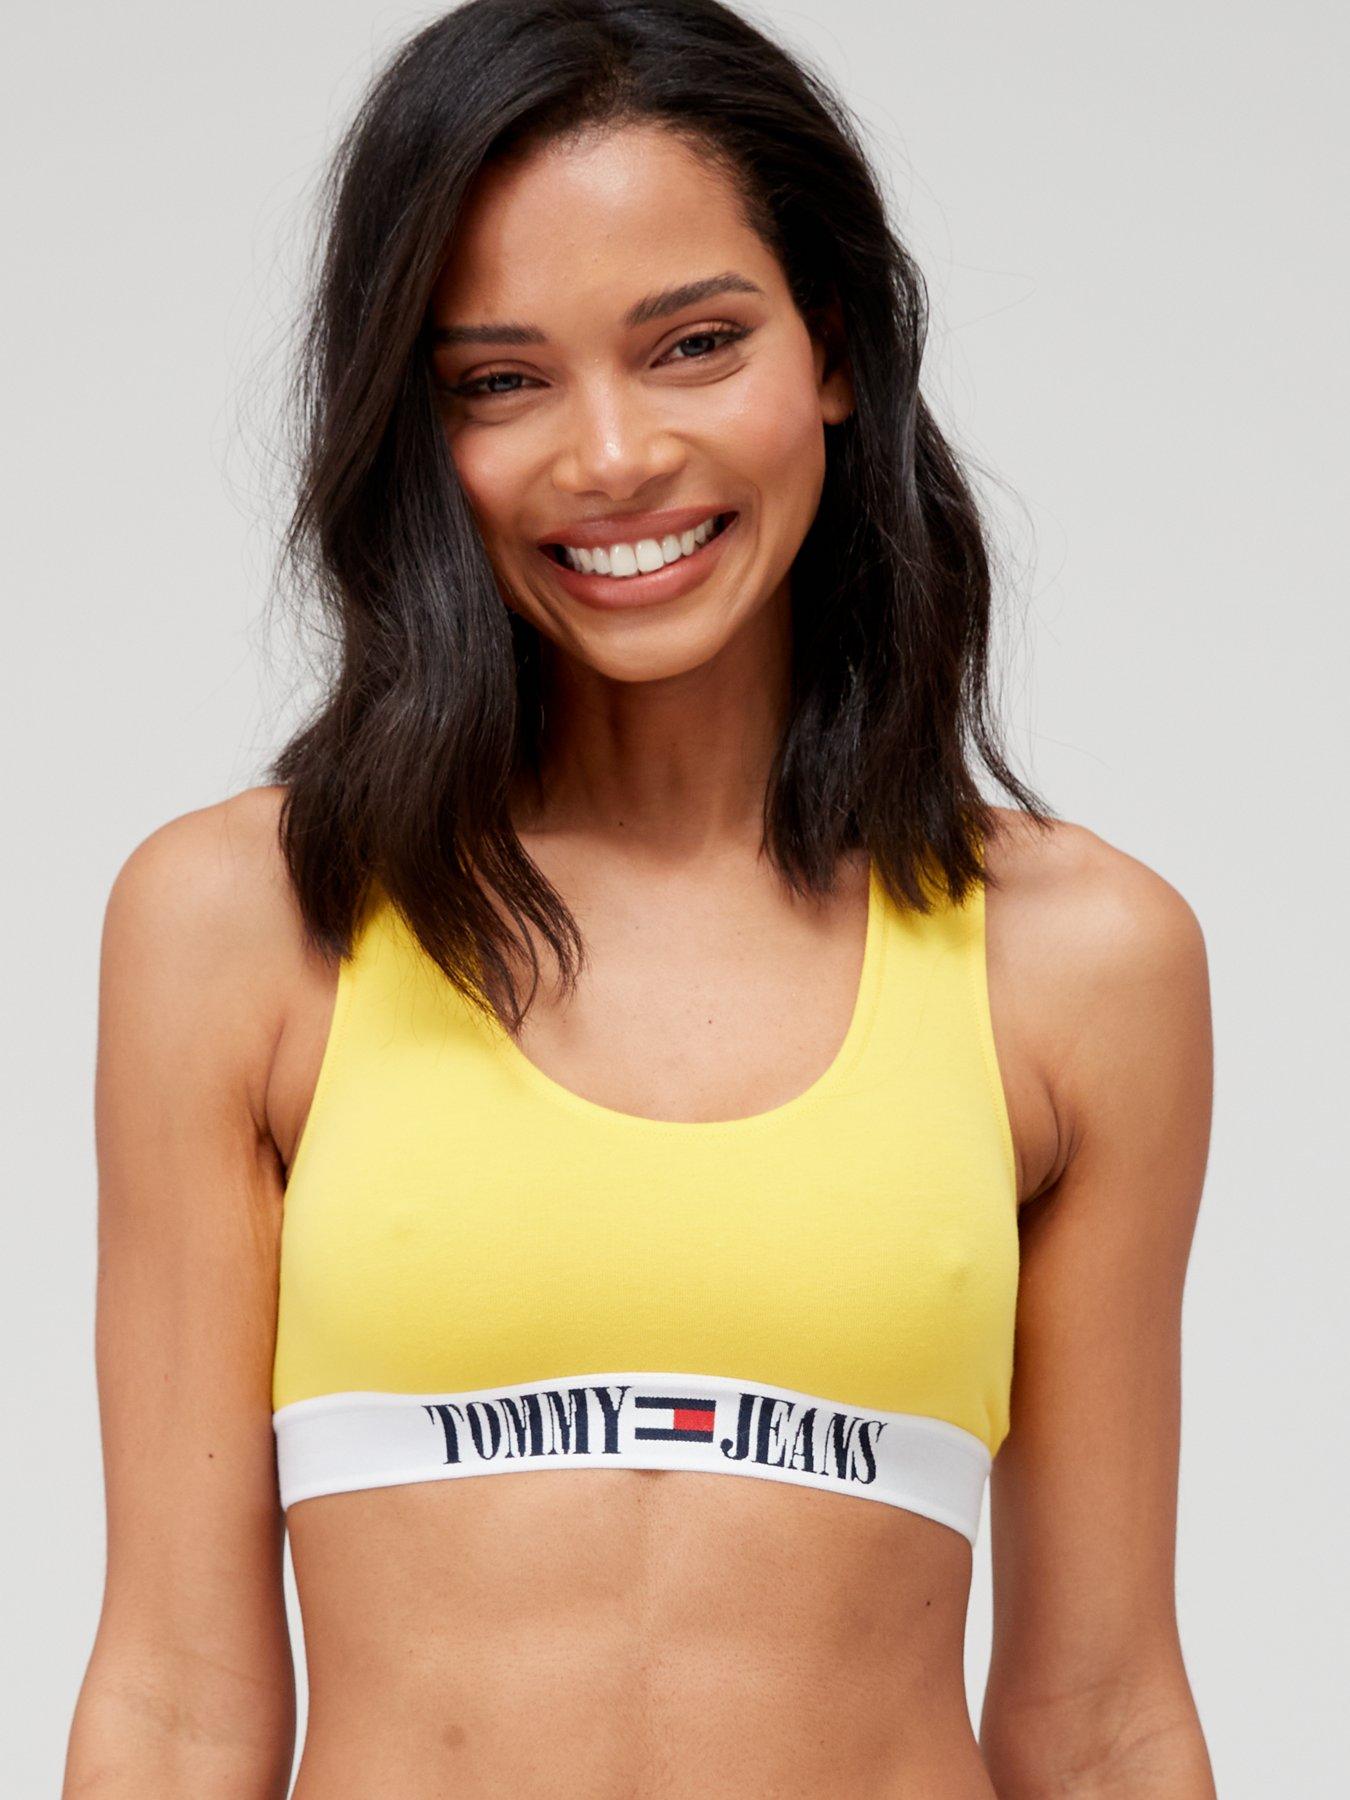 Tommy Jeans Archive Unlined Bralette - Yellow